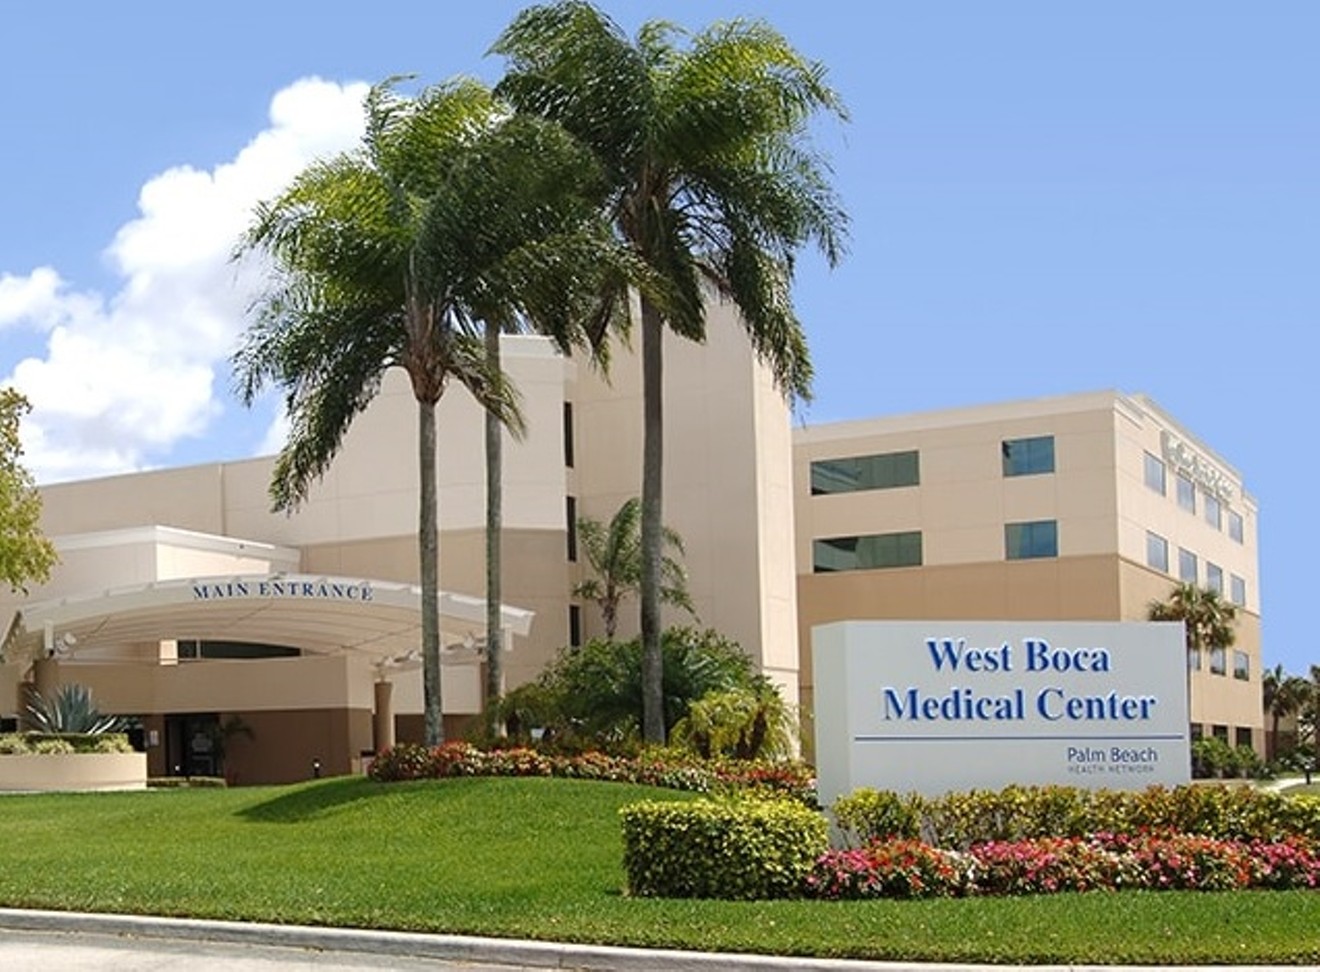 West Boca Medical Center is one of six hospitals listed in the Palm Beach Health Network, the largest hospital network in the county.